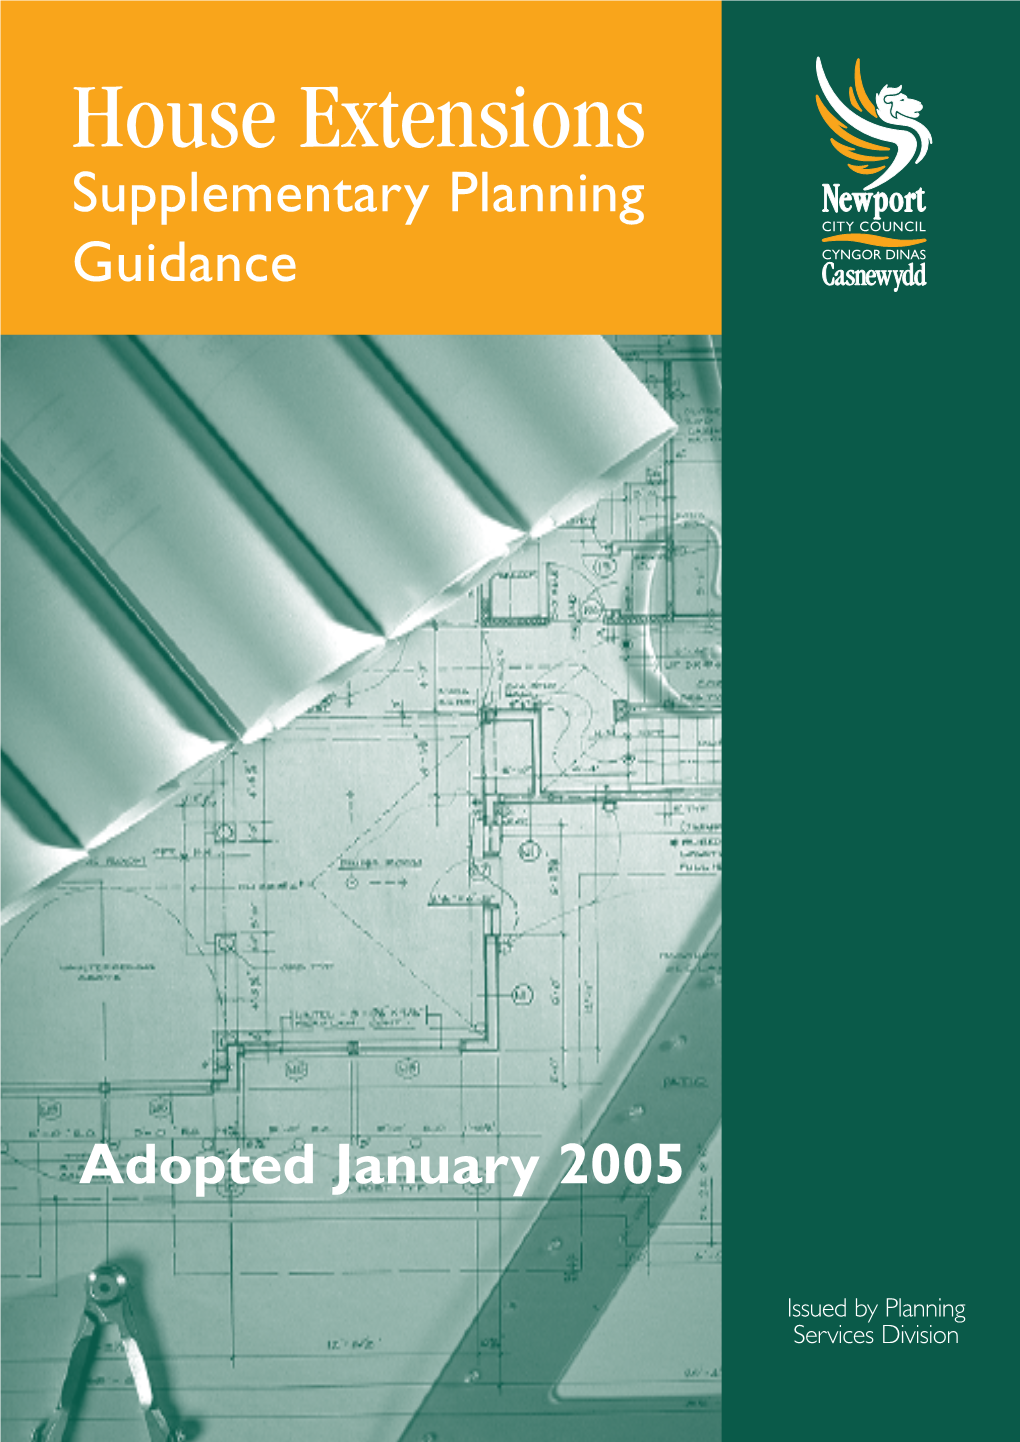 House Extensions Supplementary Planning Guidance